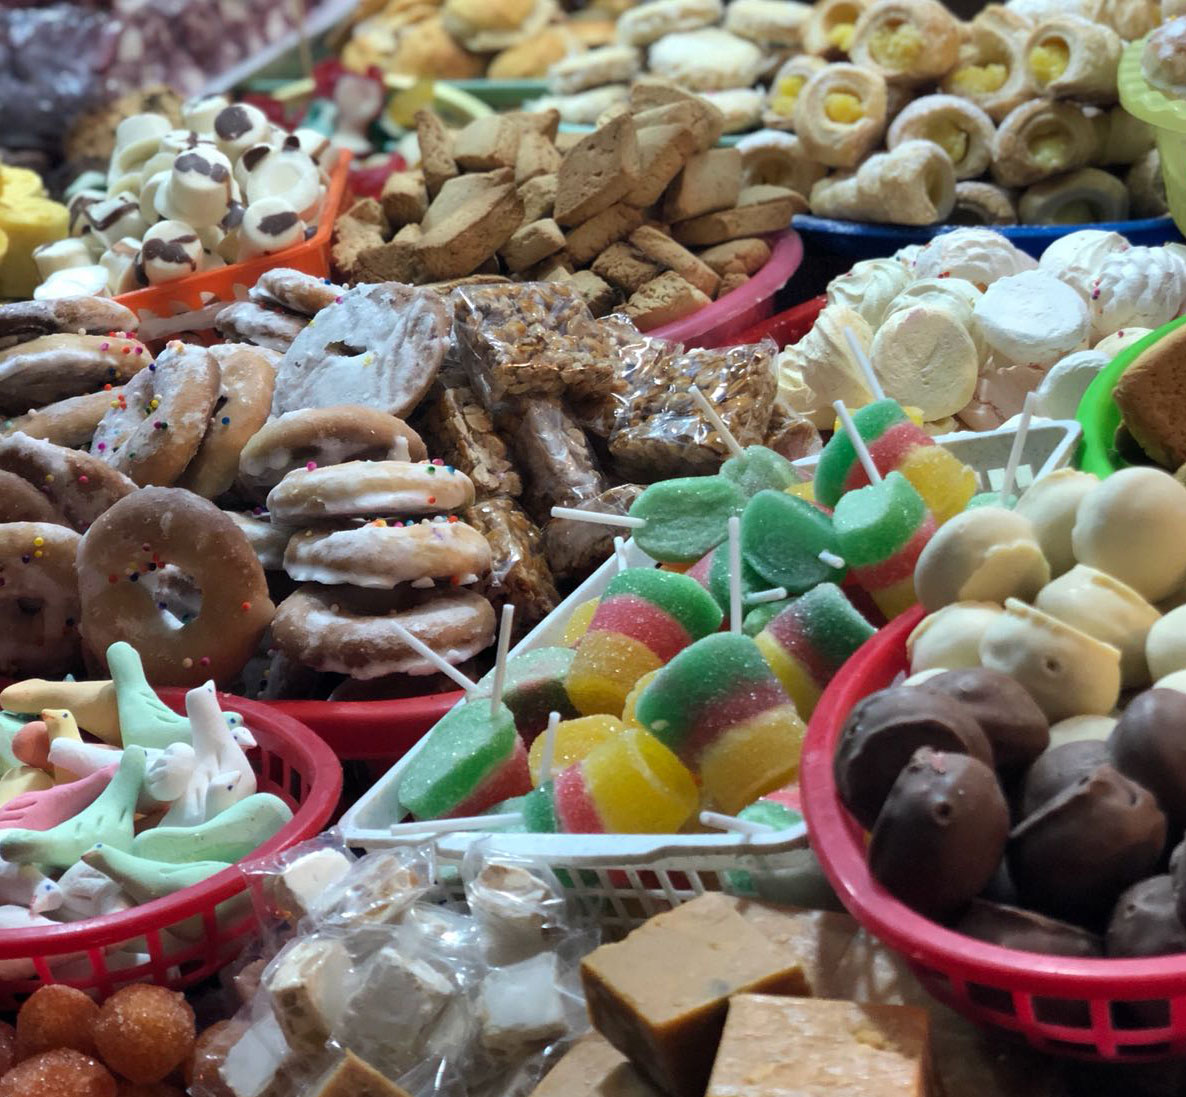 various colorful confectionary items